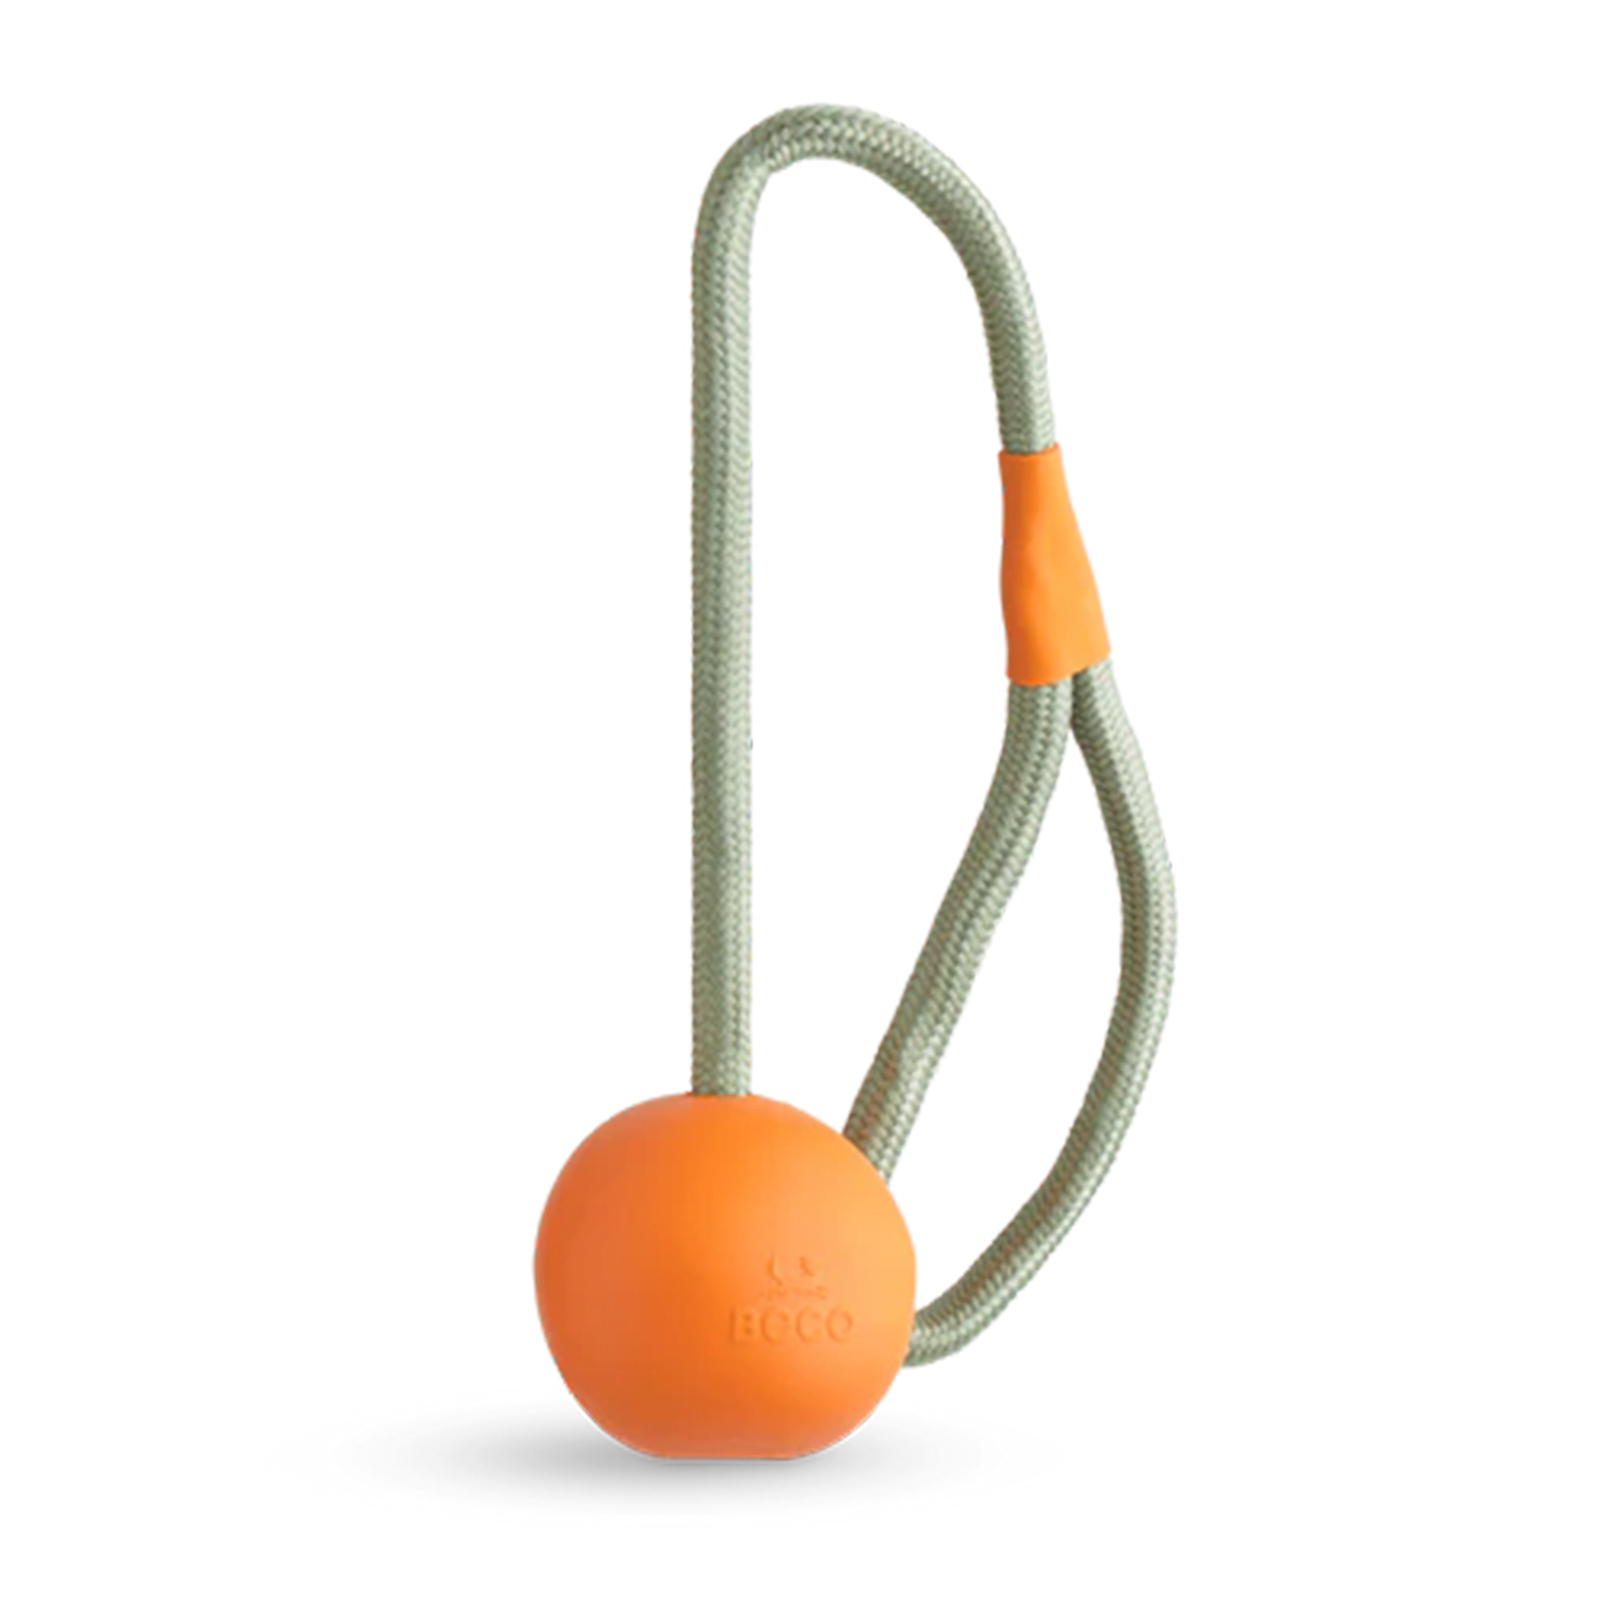 Beco Natural Rubber Slinger Ball With Rope Orange Fetch Toy For Dogs -  $19.95